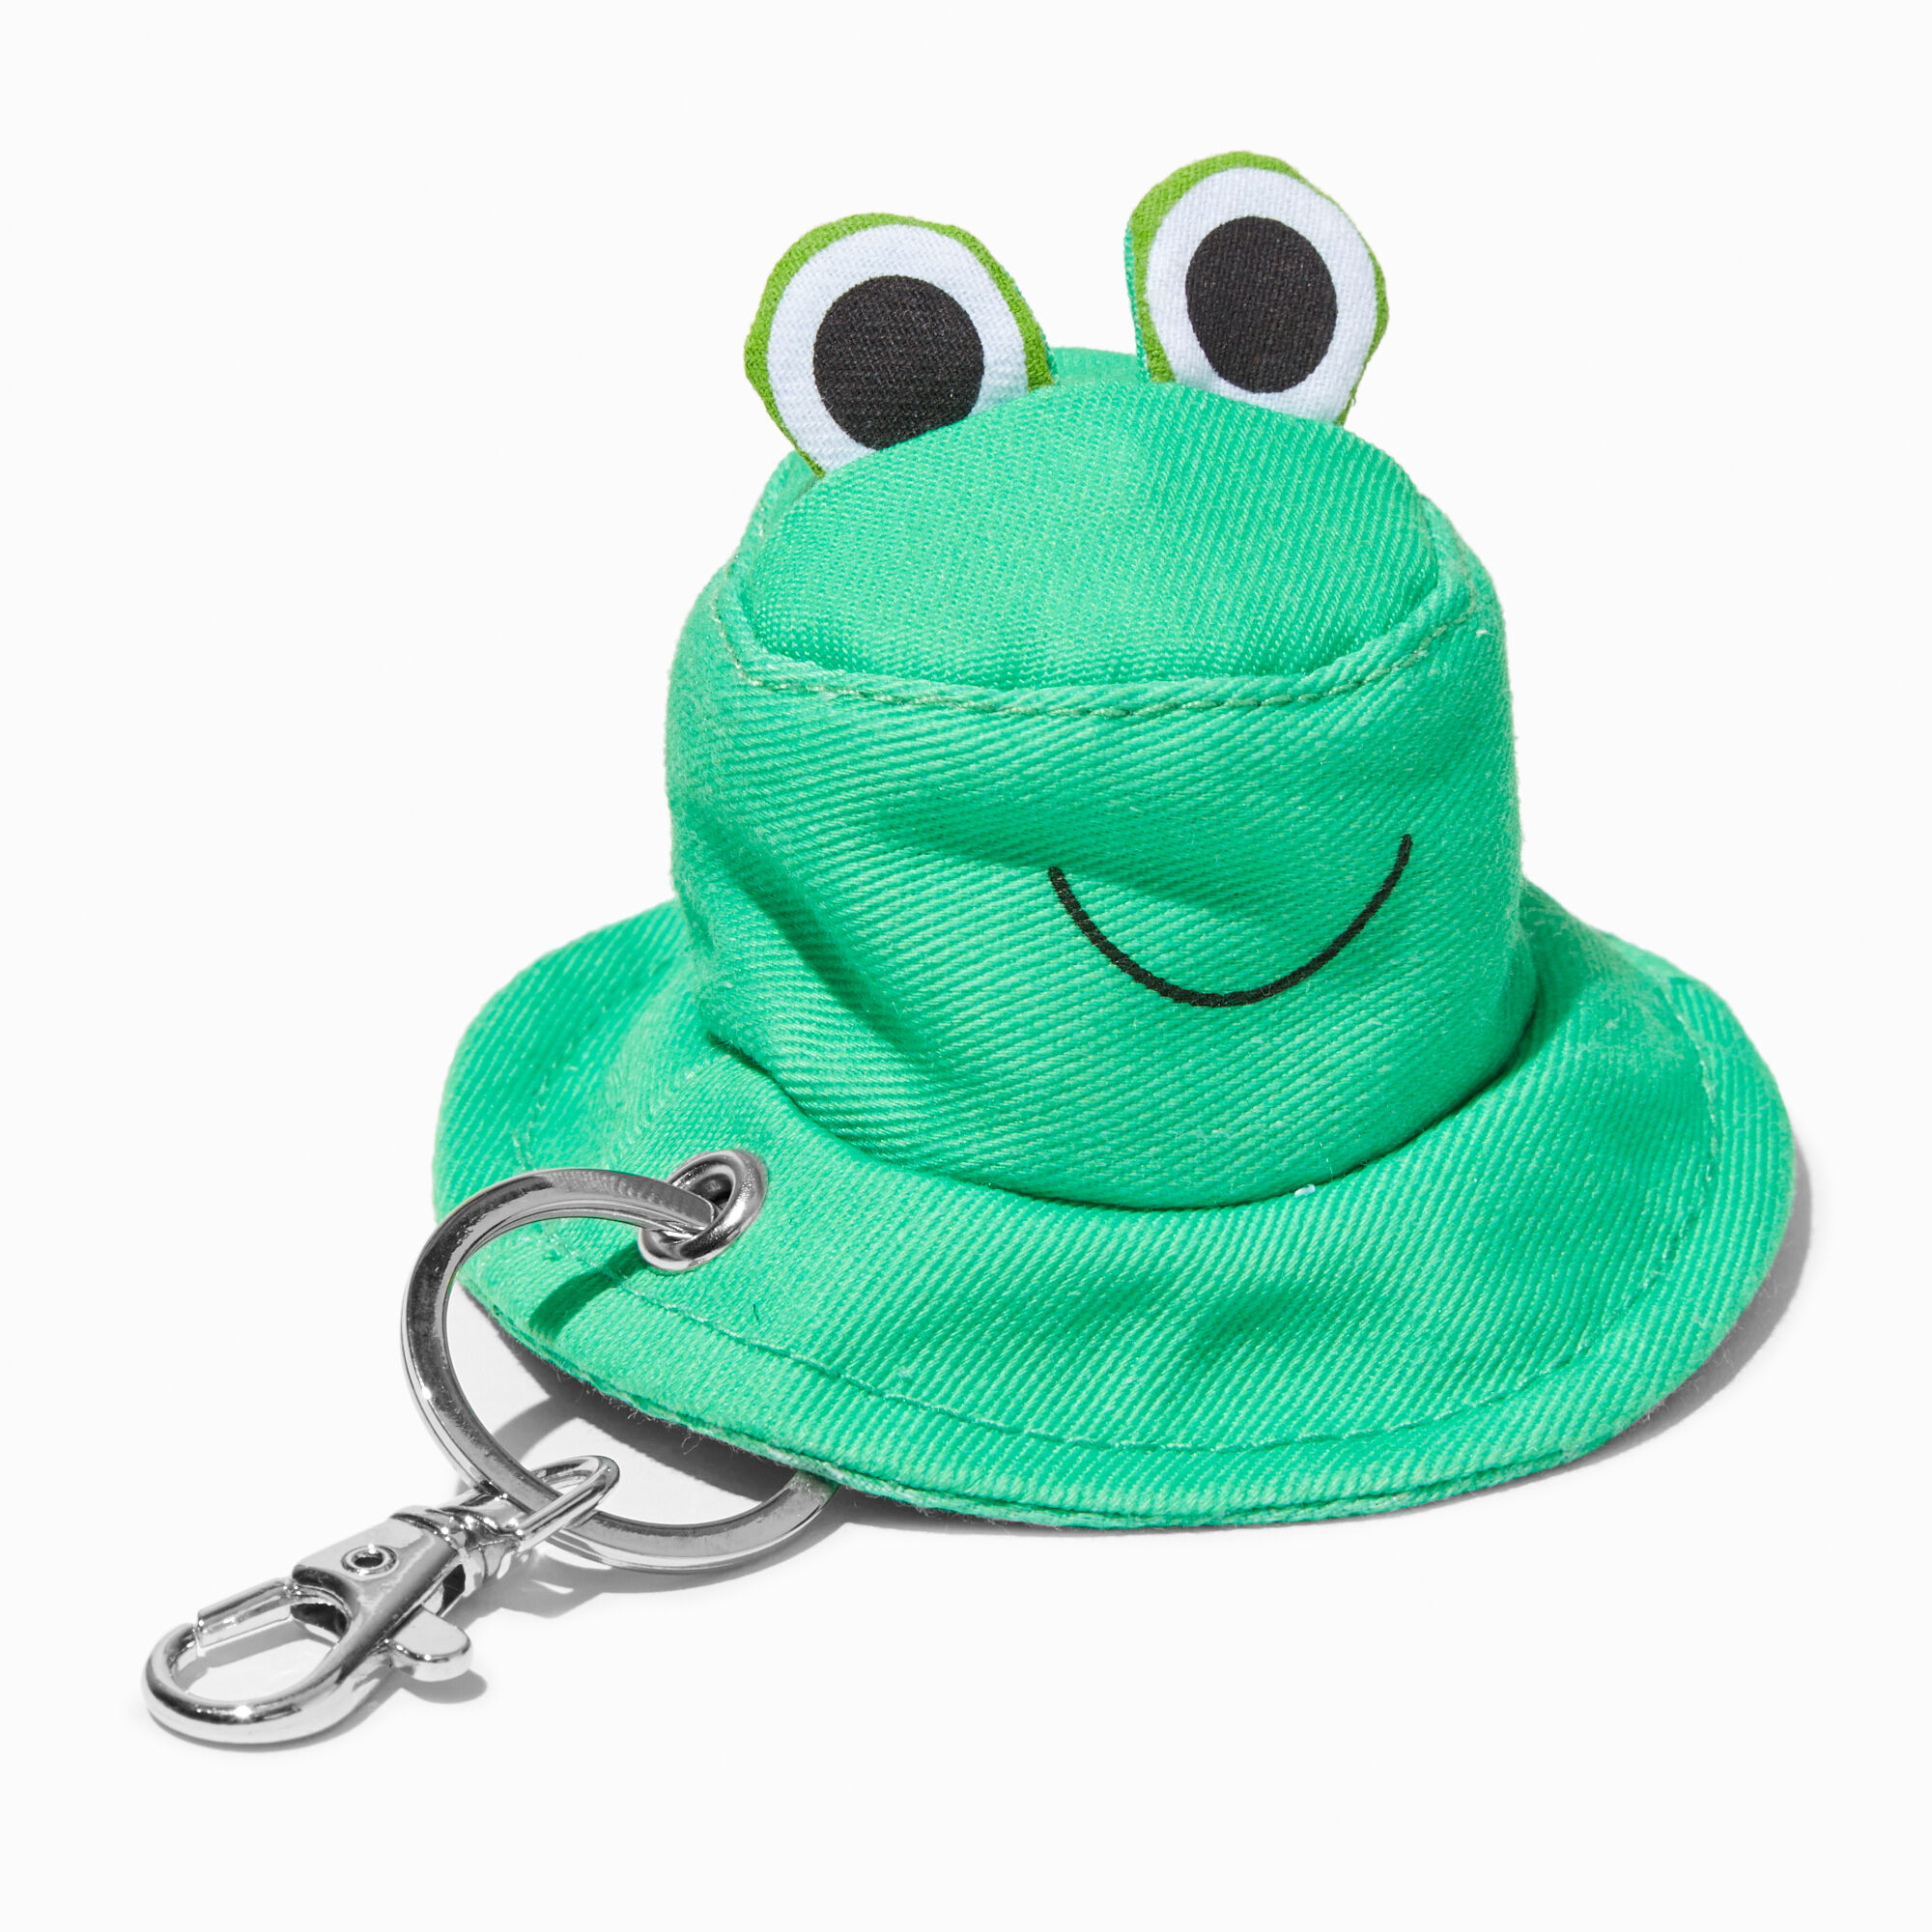 View Claires Frog Bucket Hat Keychain Green information